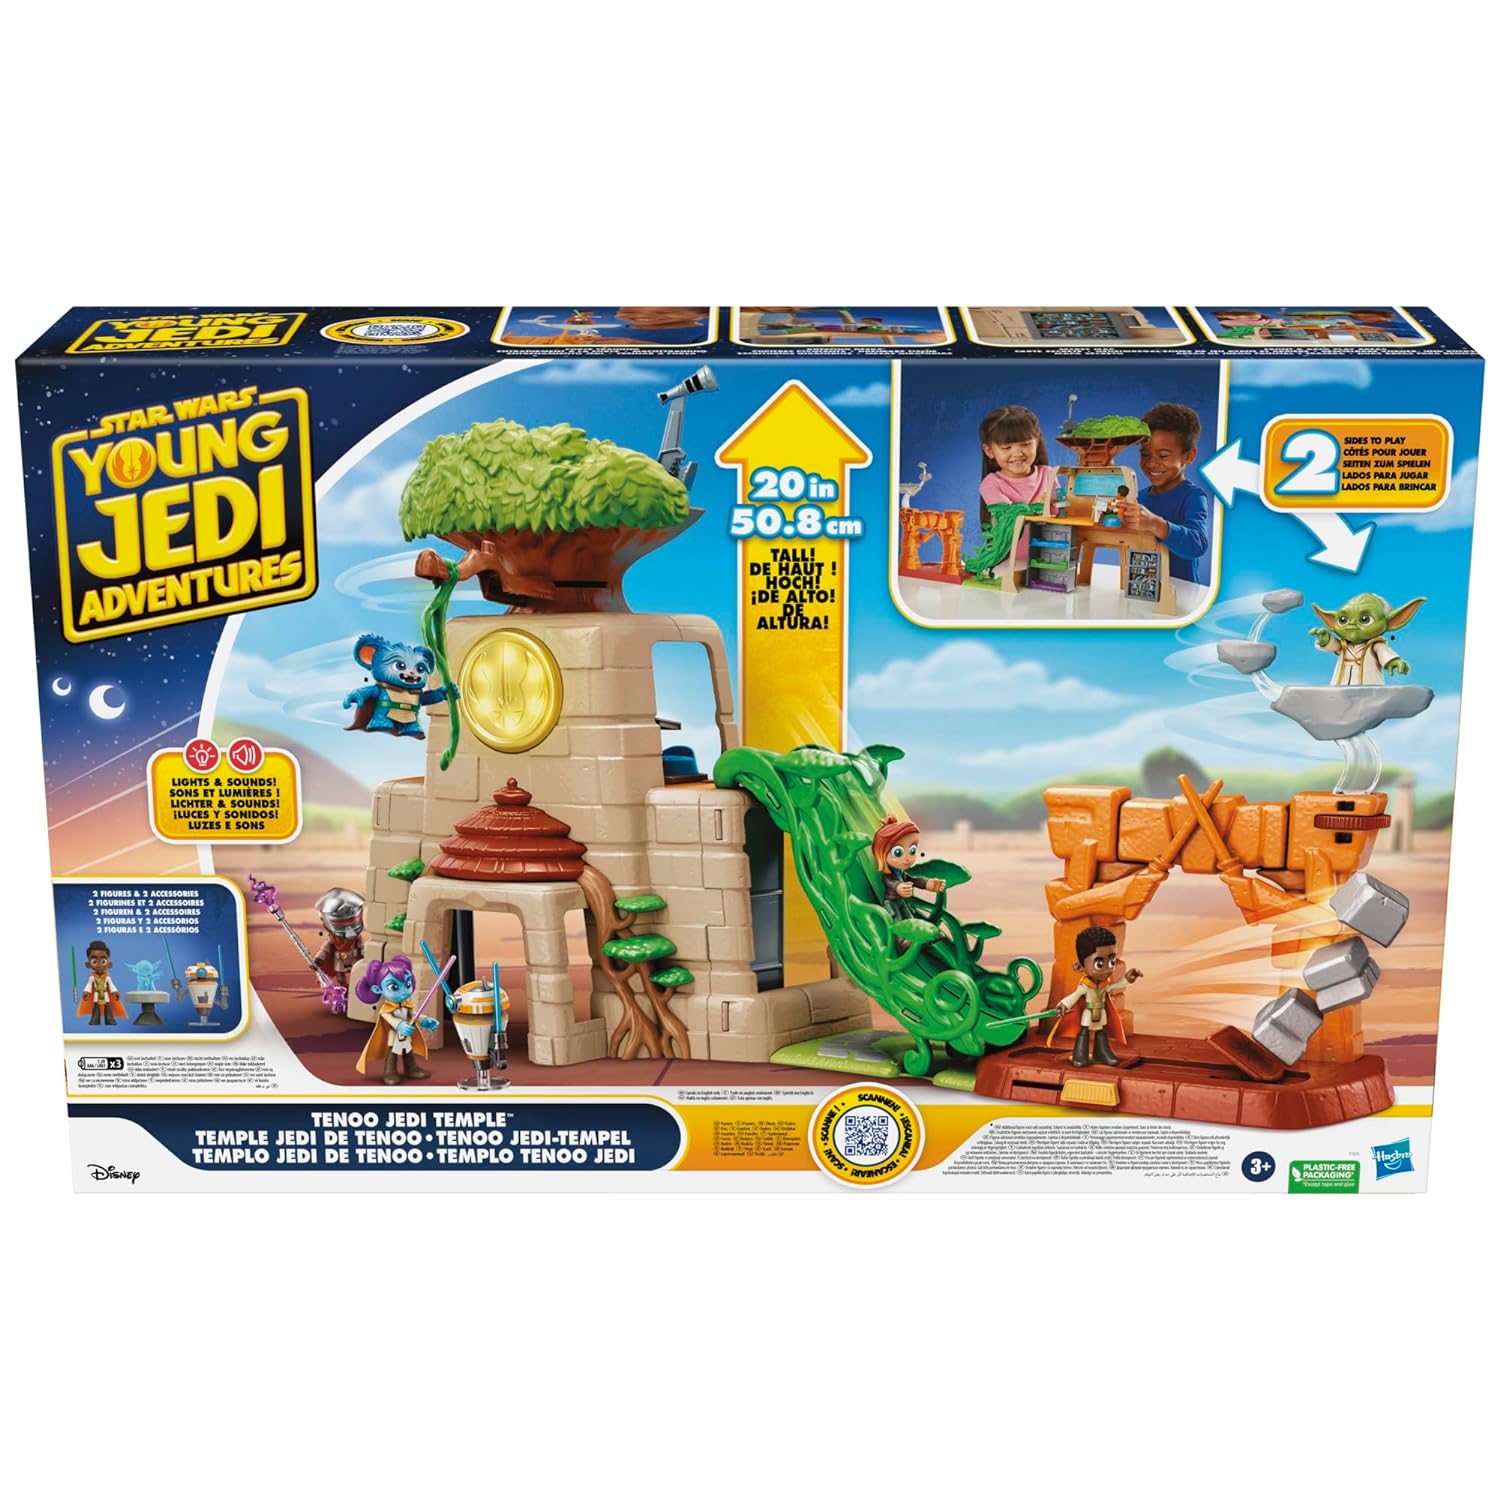 Hasbro Star Wars: Young Jedi Adventures Tenoo Jedi Temple, 20-Inch-Tall Playset with Lights & Sounds, 2 Action Figures, Preschool …